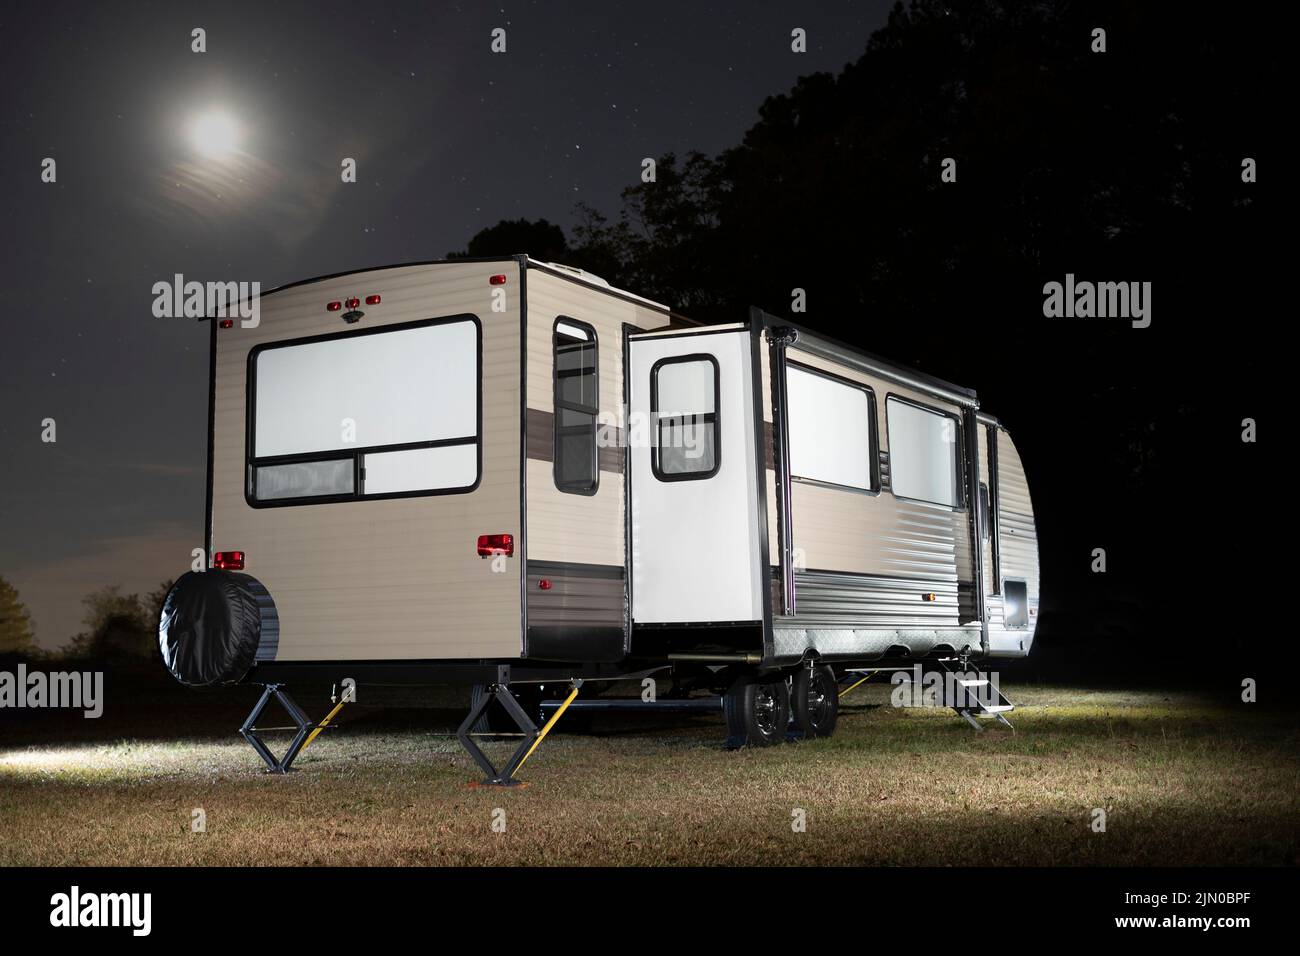 Travel trailer with slides out and moon and stars above Stock Photo